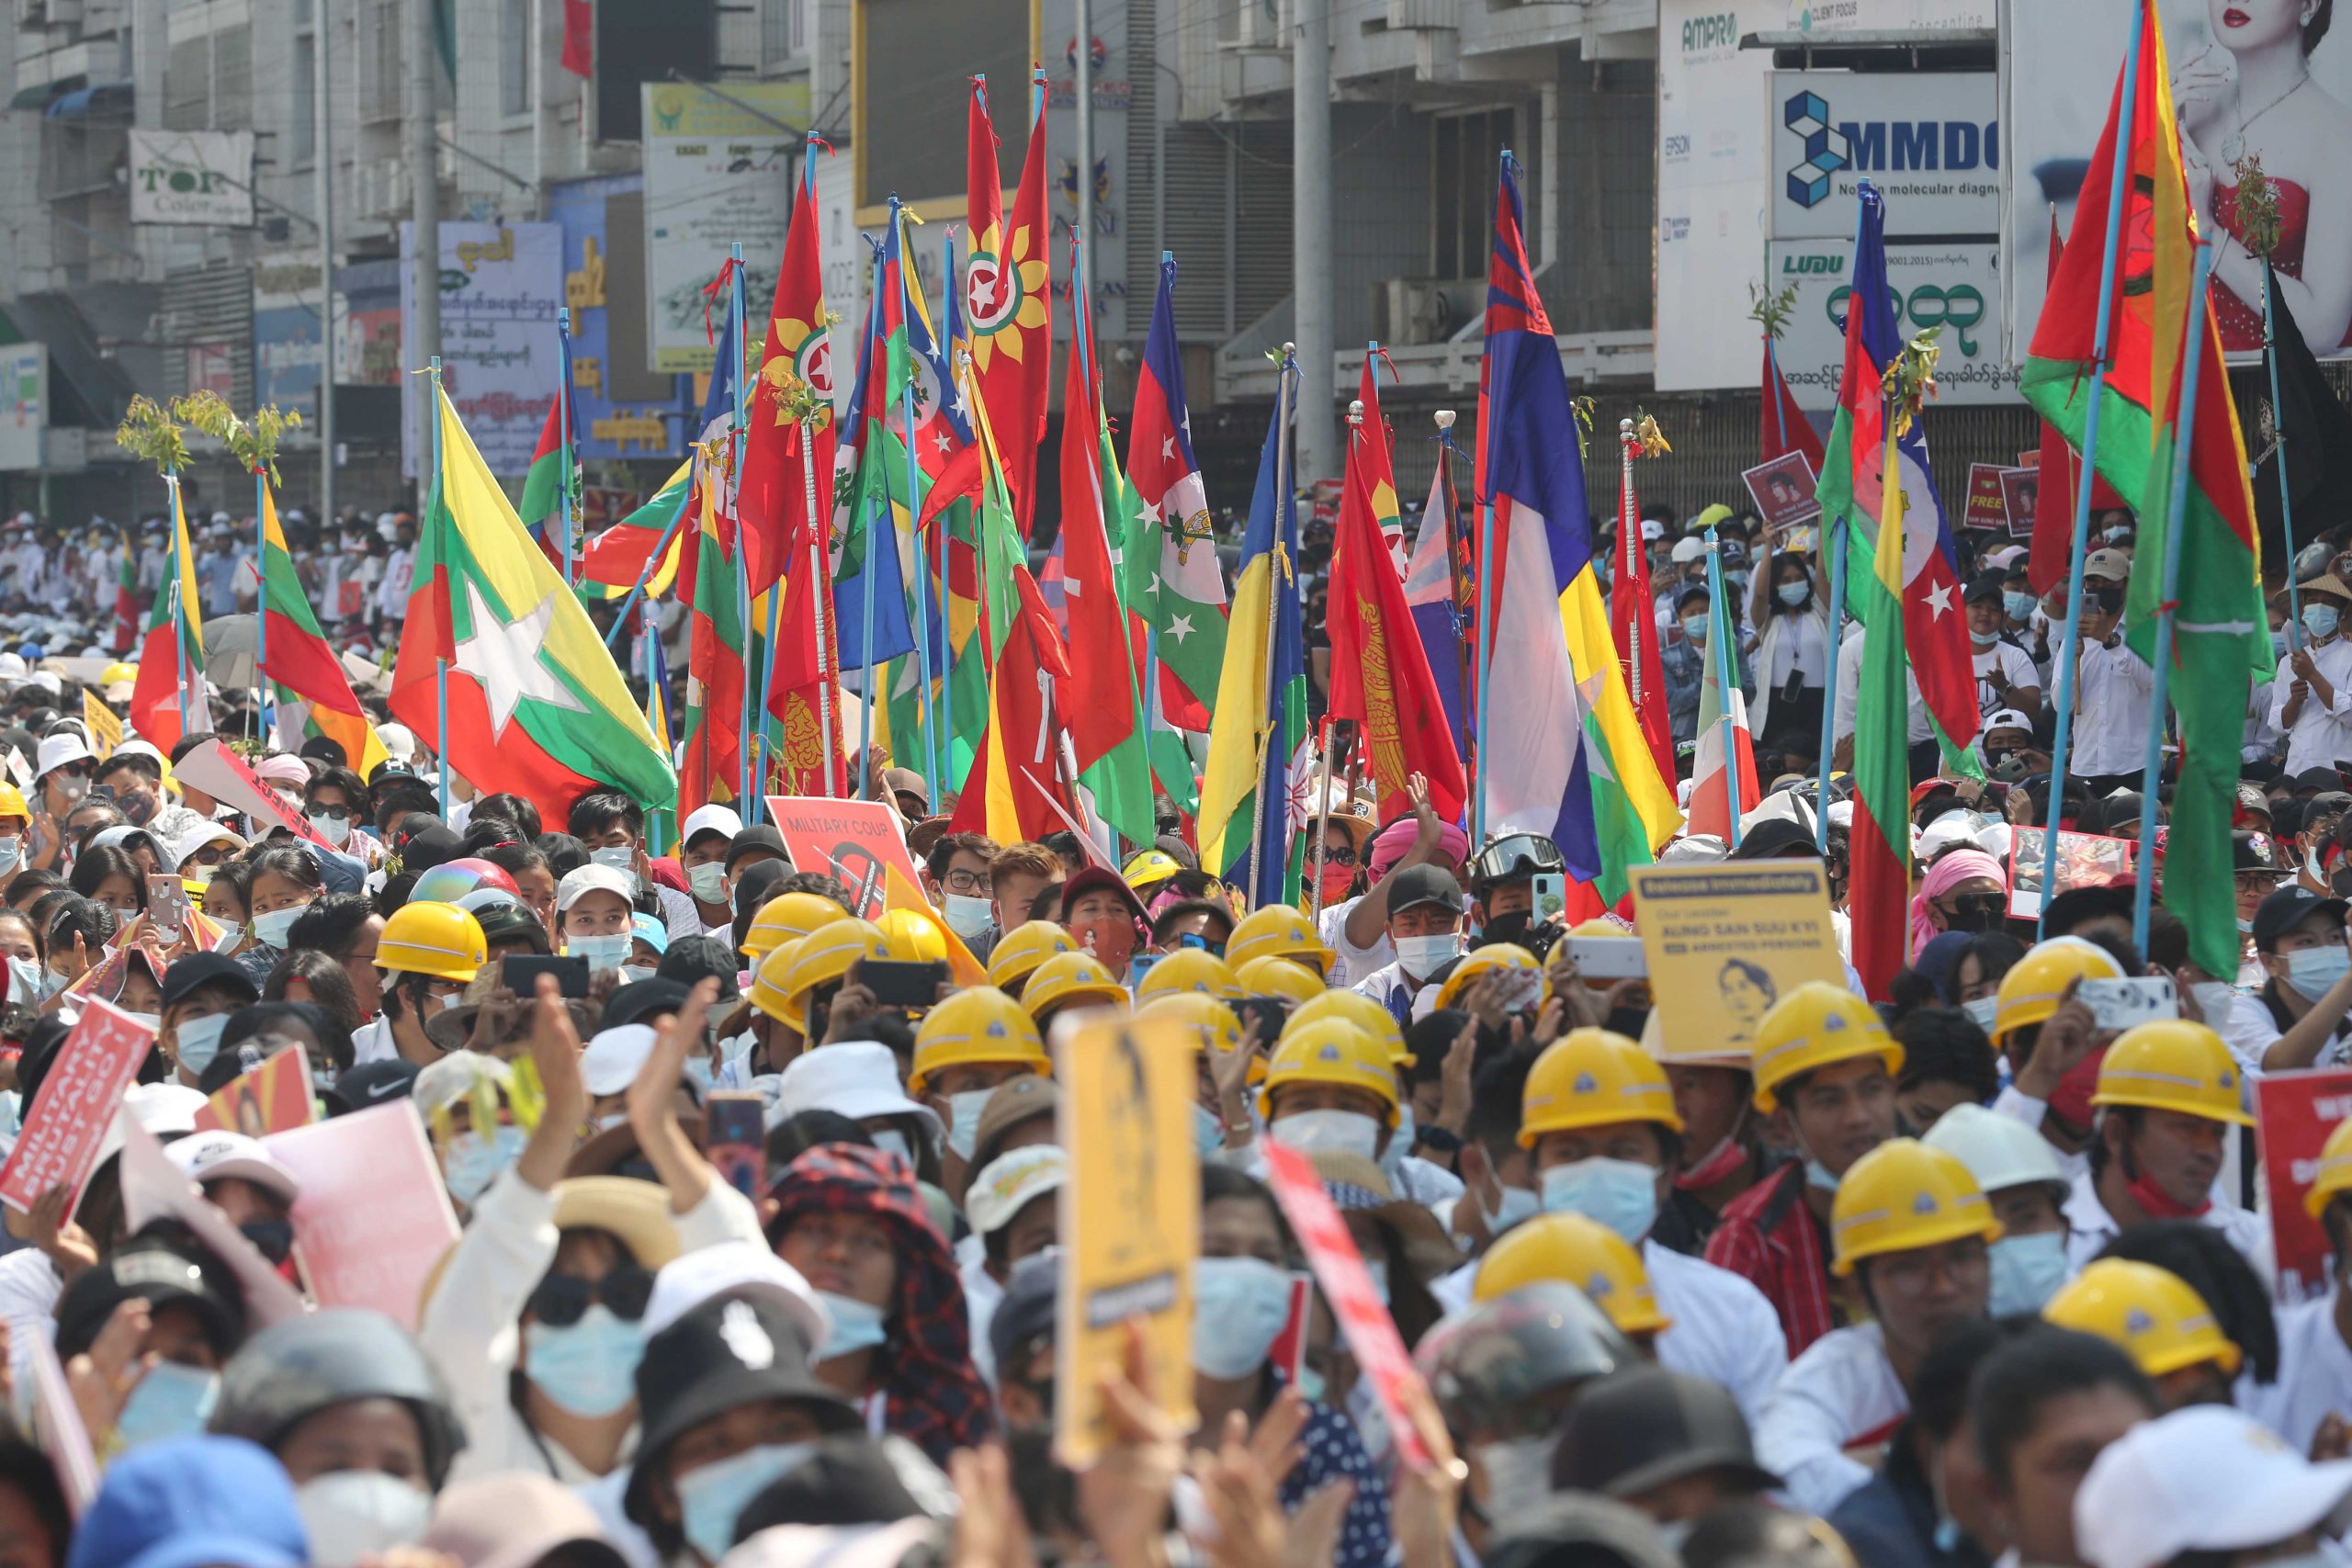 Pro-democracy protestors hold up flag representing various ethnic groups and organizations at a protest in Mandalay on February 22, 2021. (Frontier)